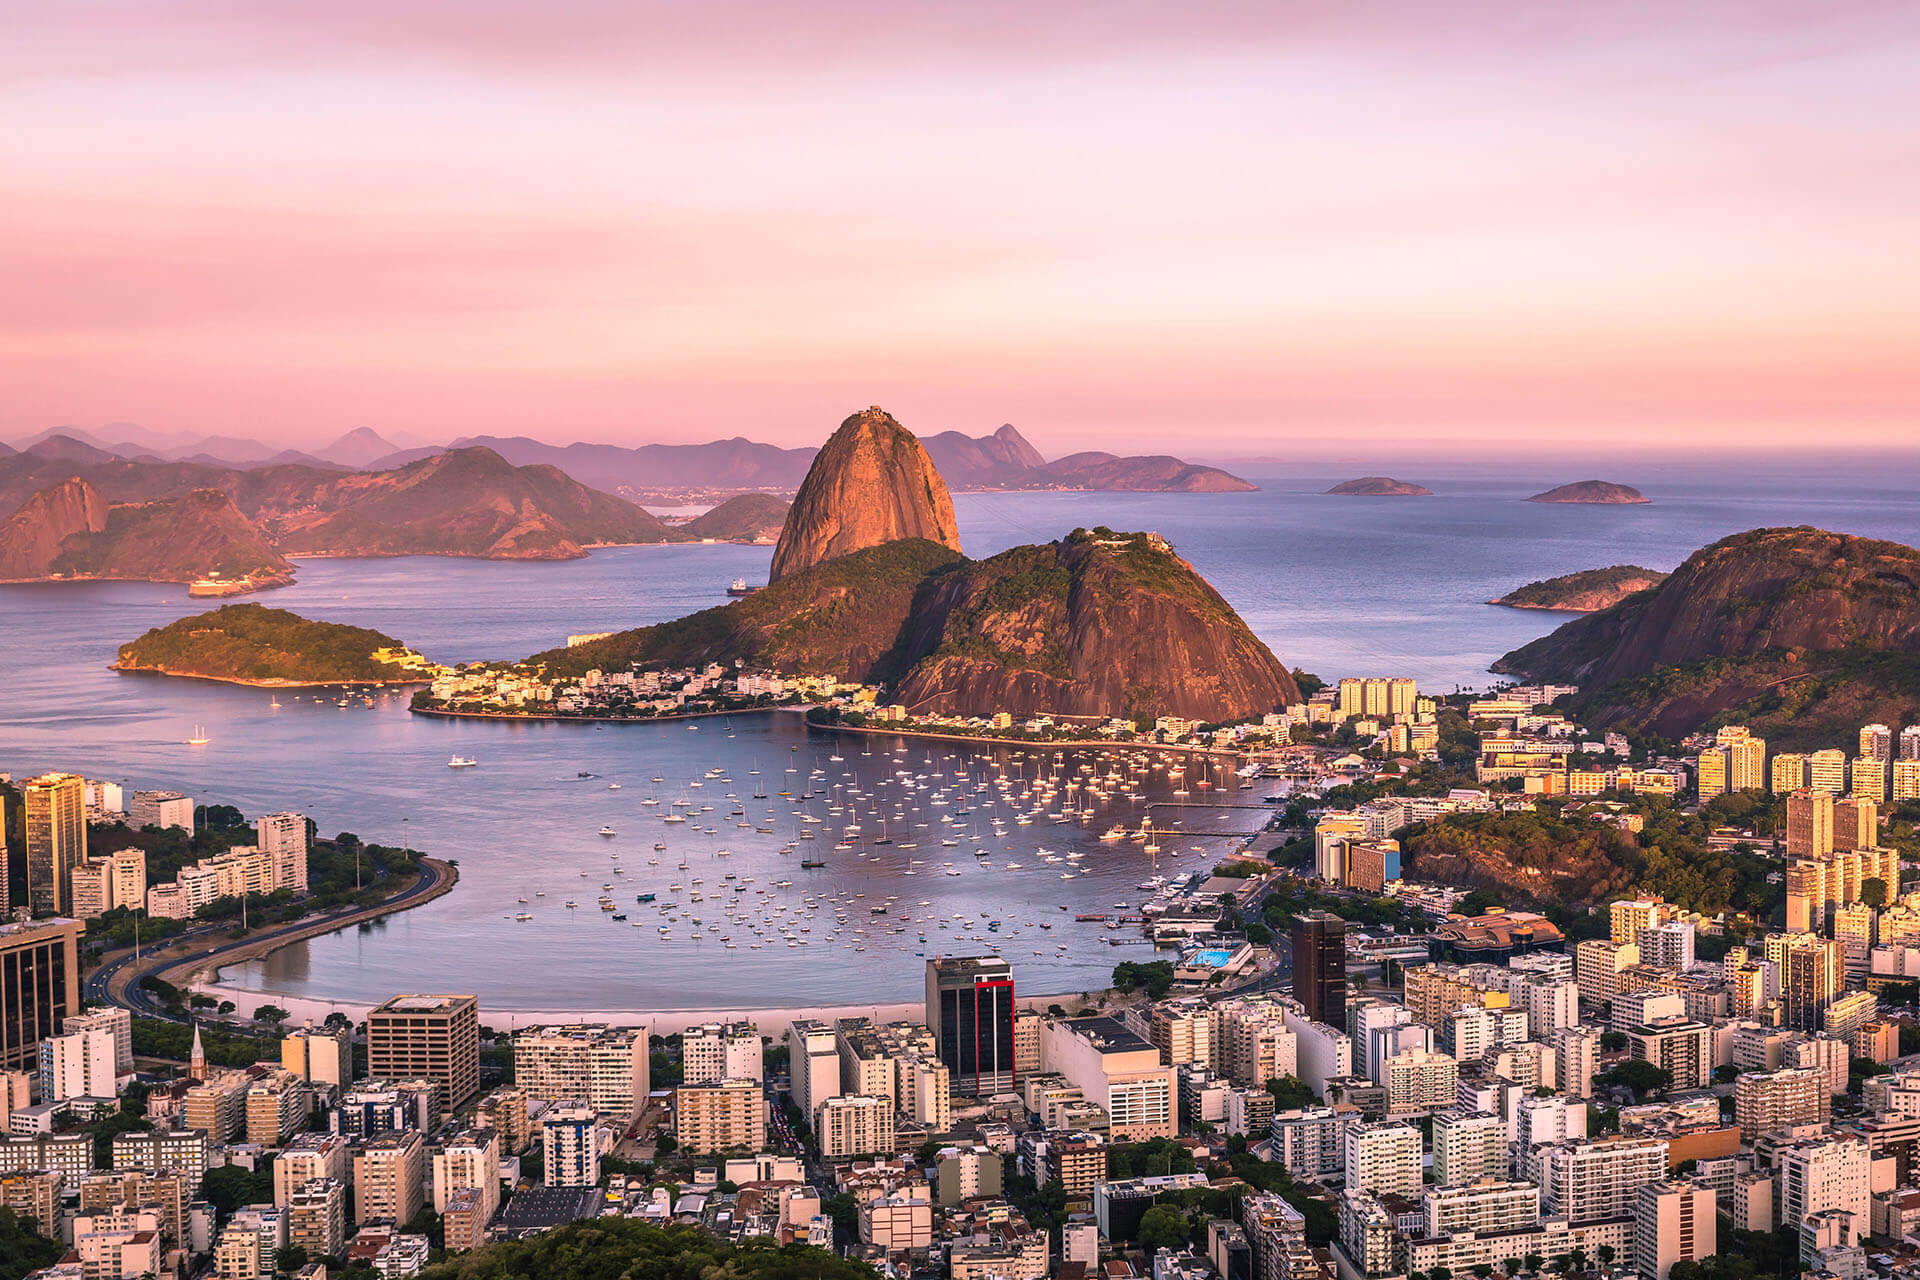 Brazil: Visa Required for Transit and Stay in Mexico